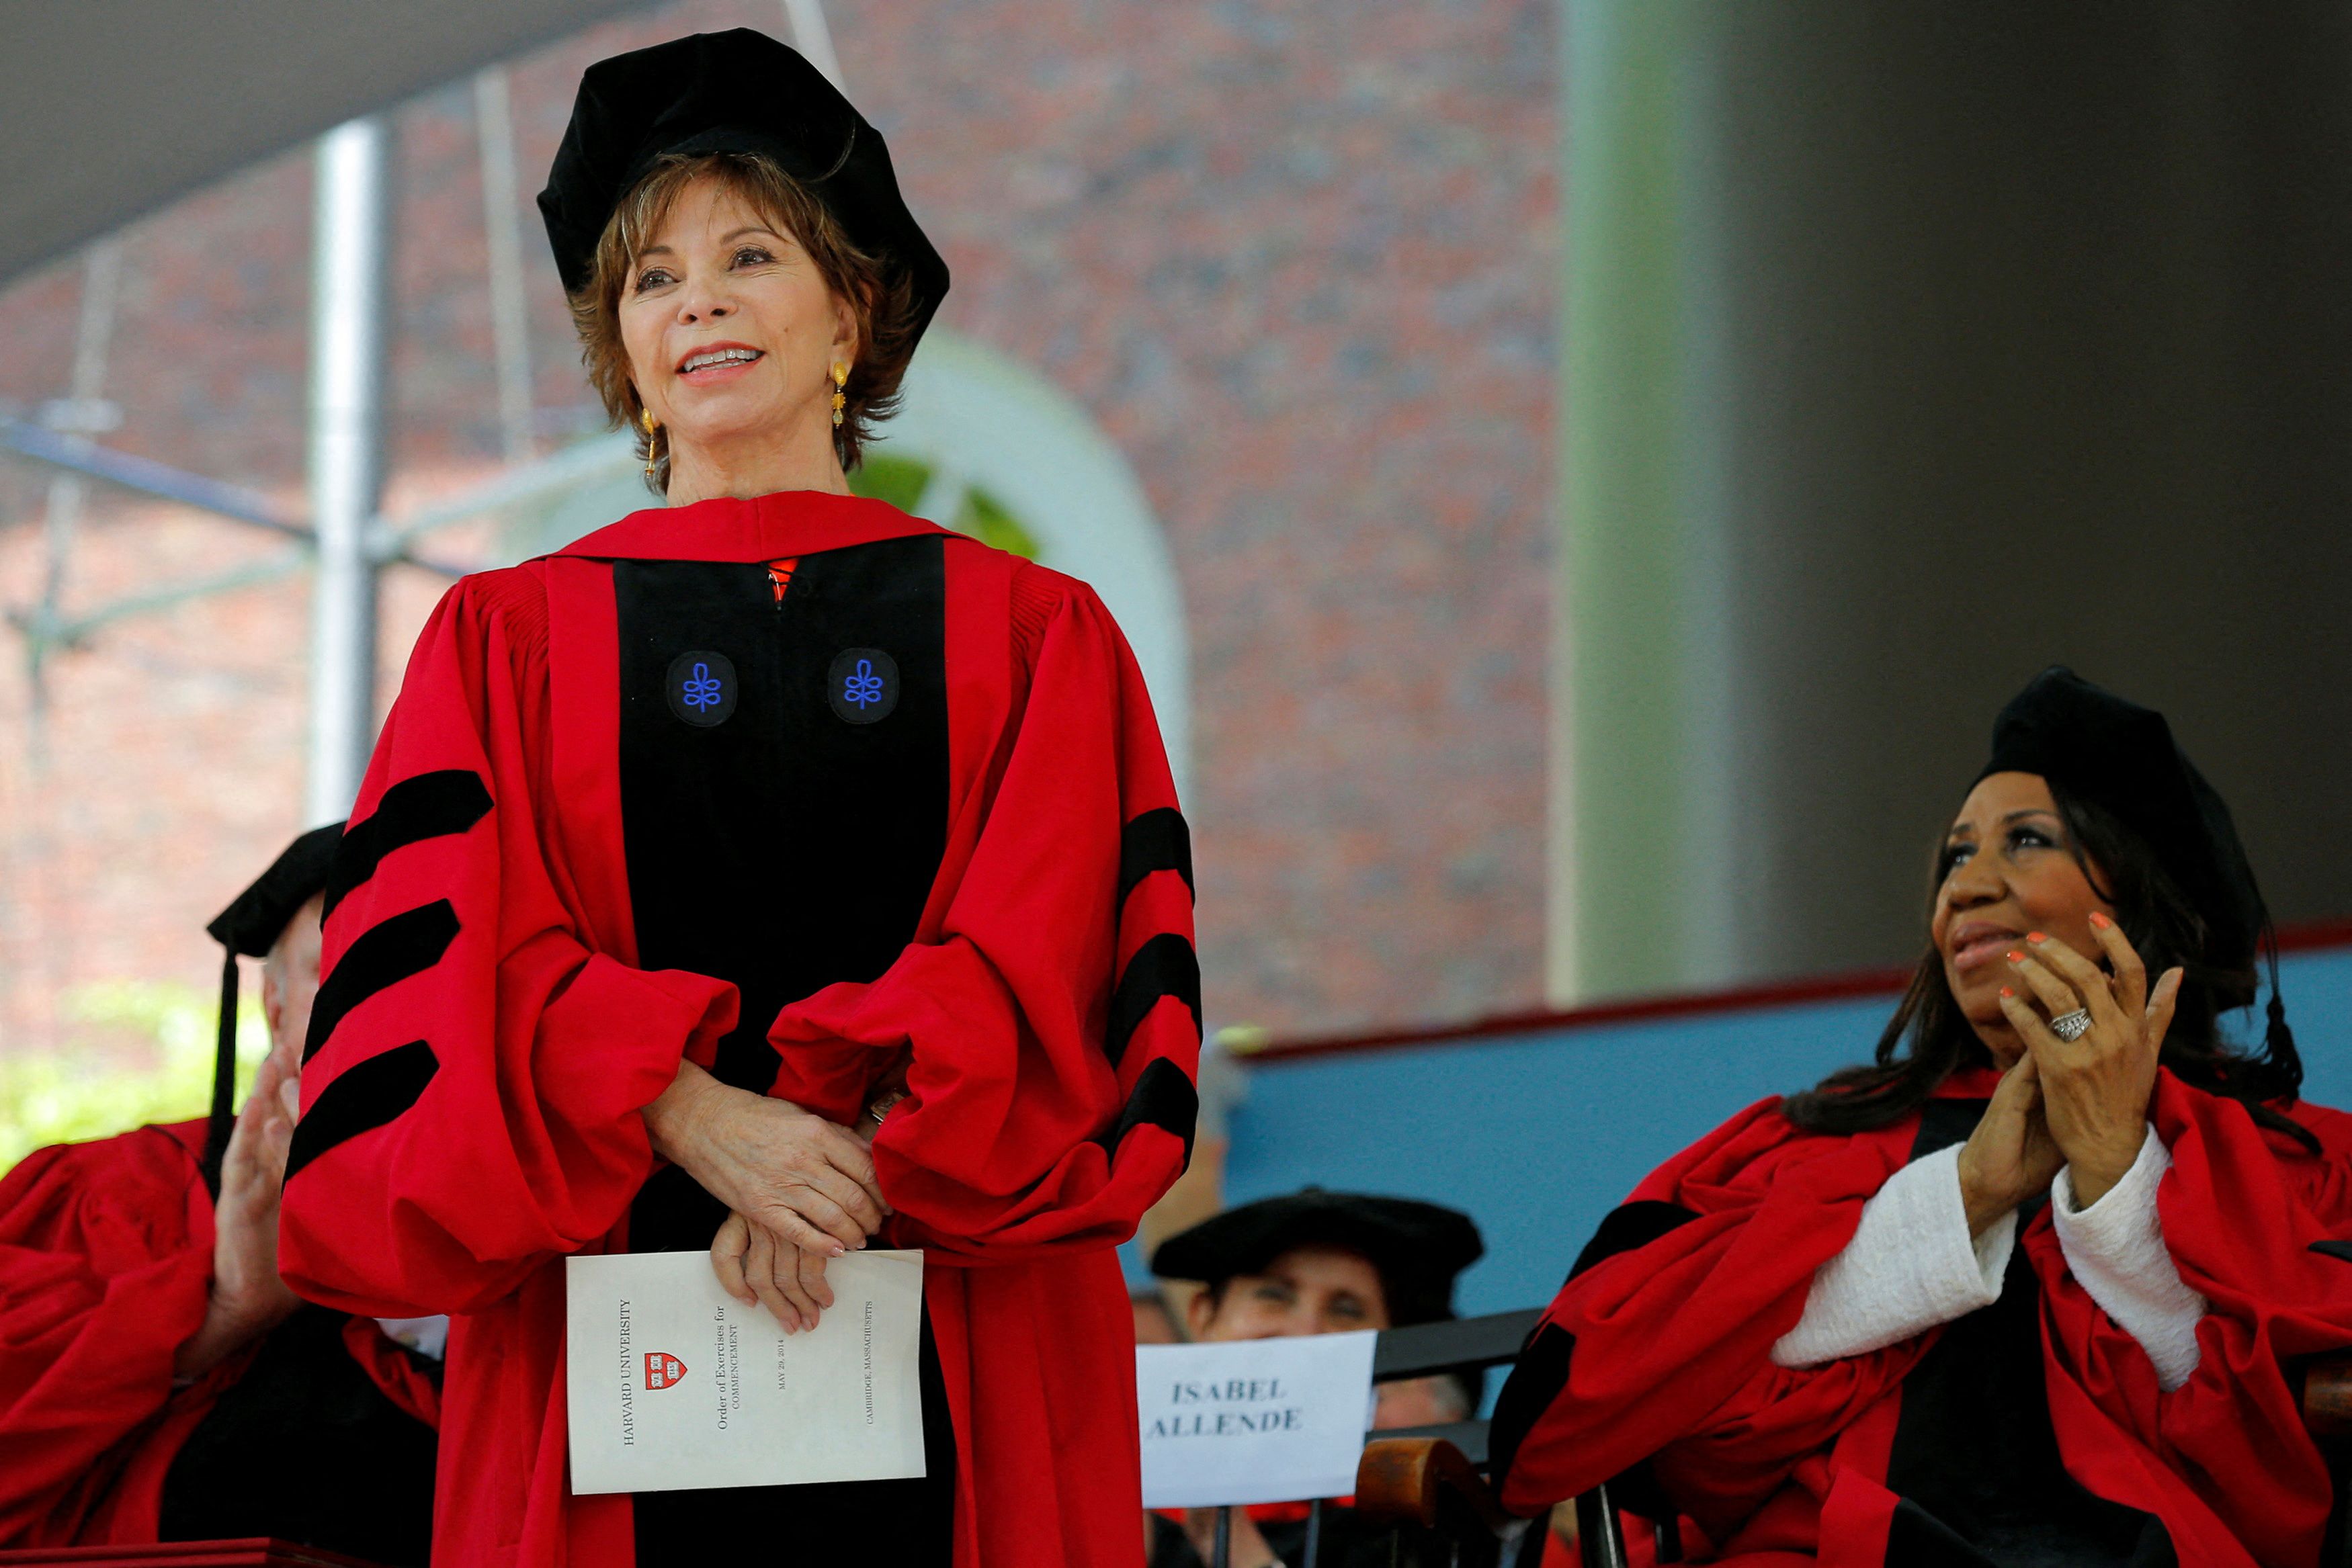 Author Allende stands to receive a honorary Doctor of Letters degree at Harvard University in Cambridge